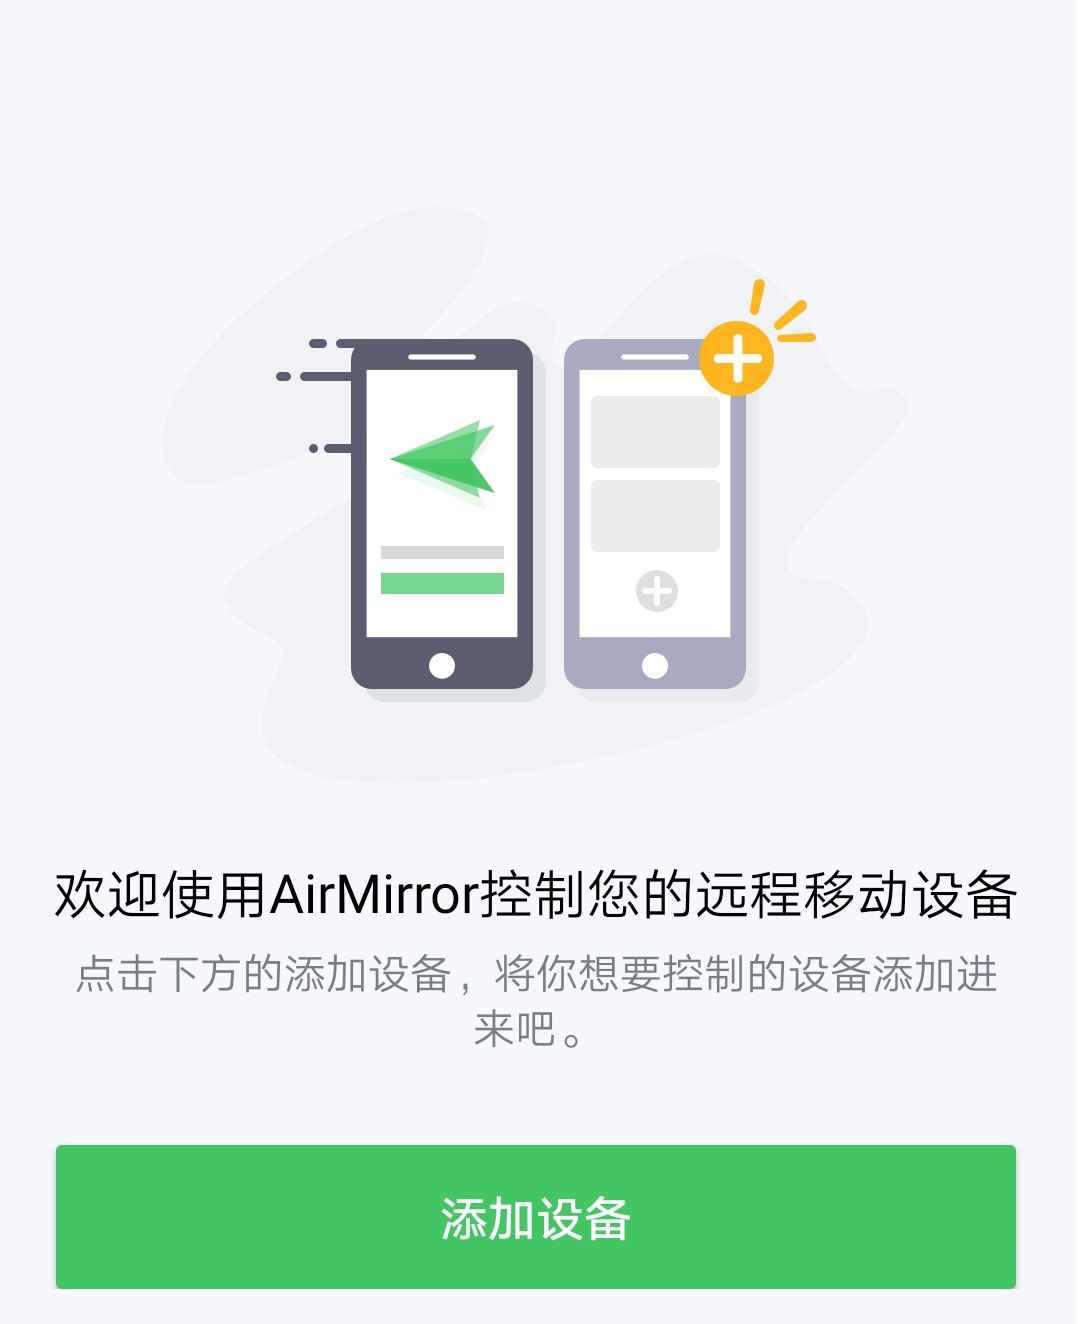 4-cn-How_to_remote_control_Android_device_from_another_Android_device_with_AirMirror_App.jpg